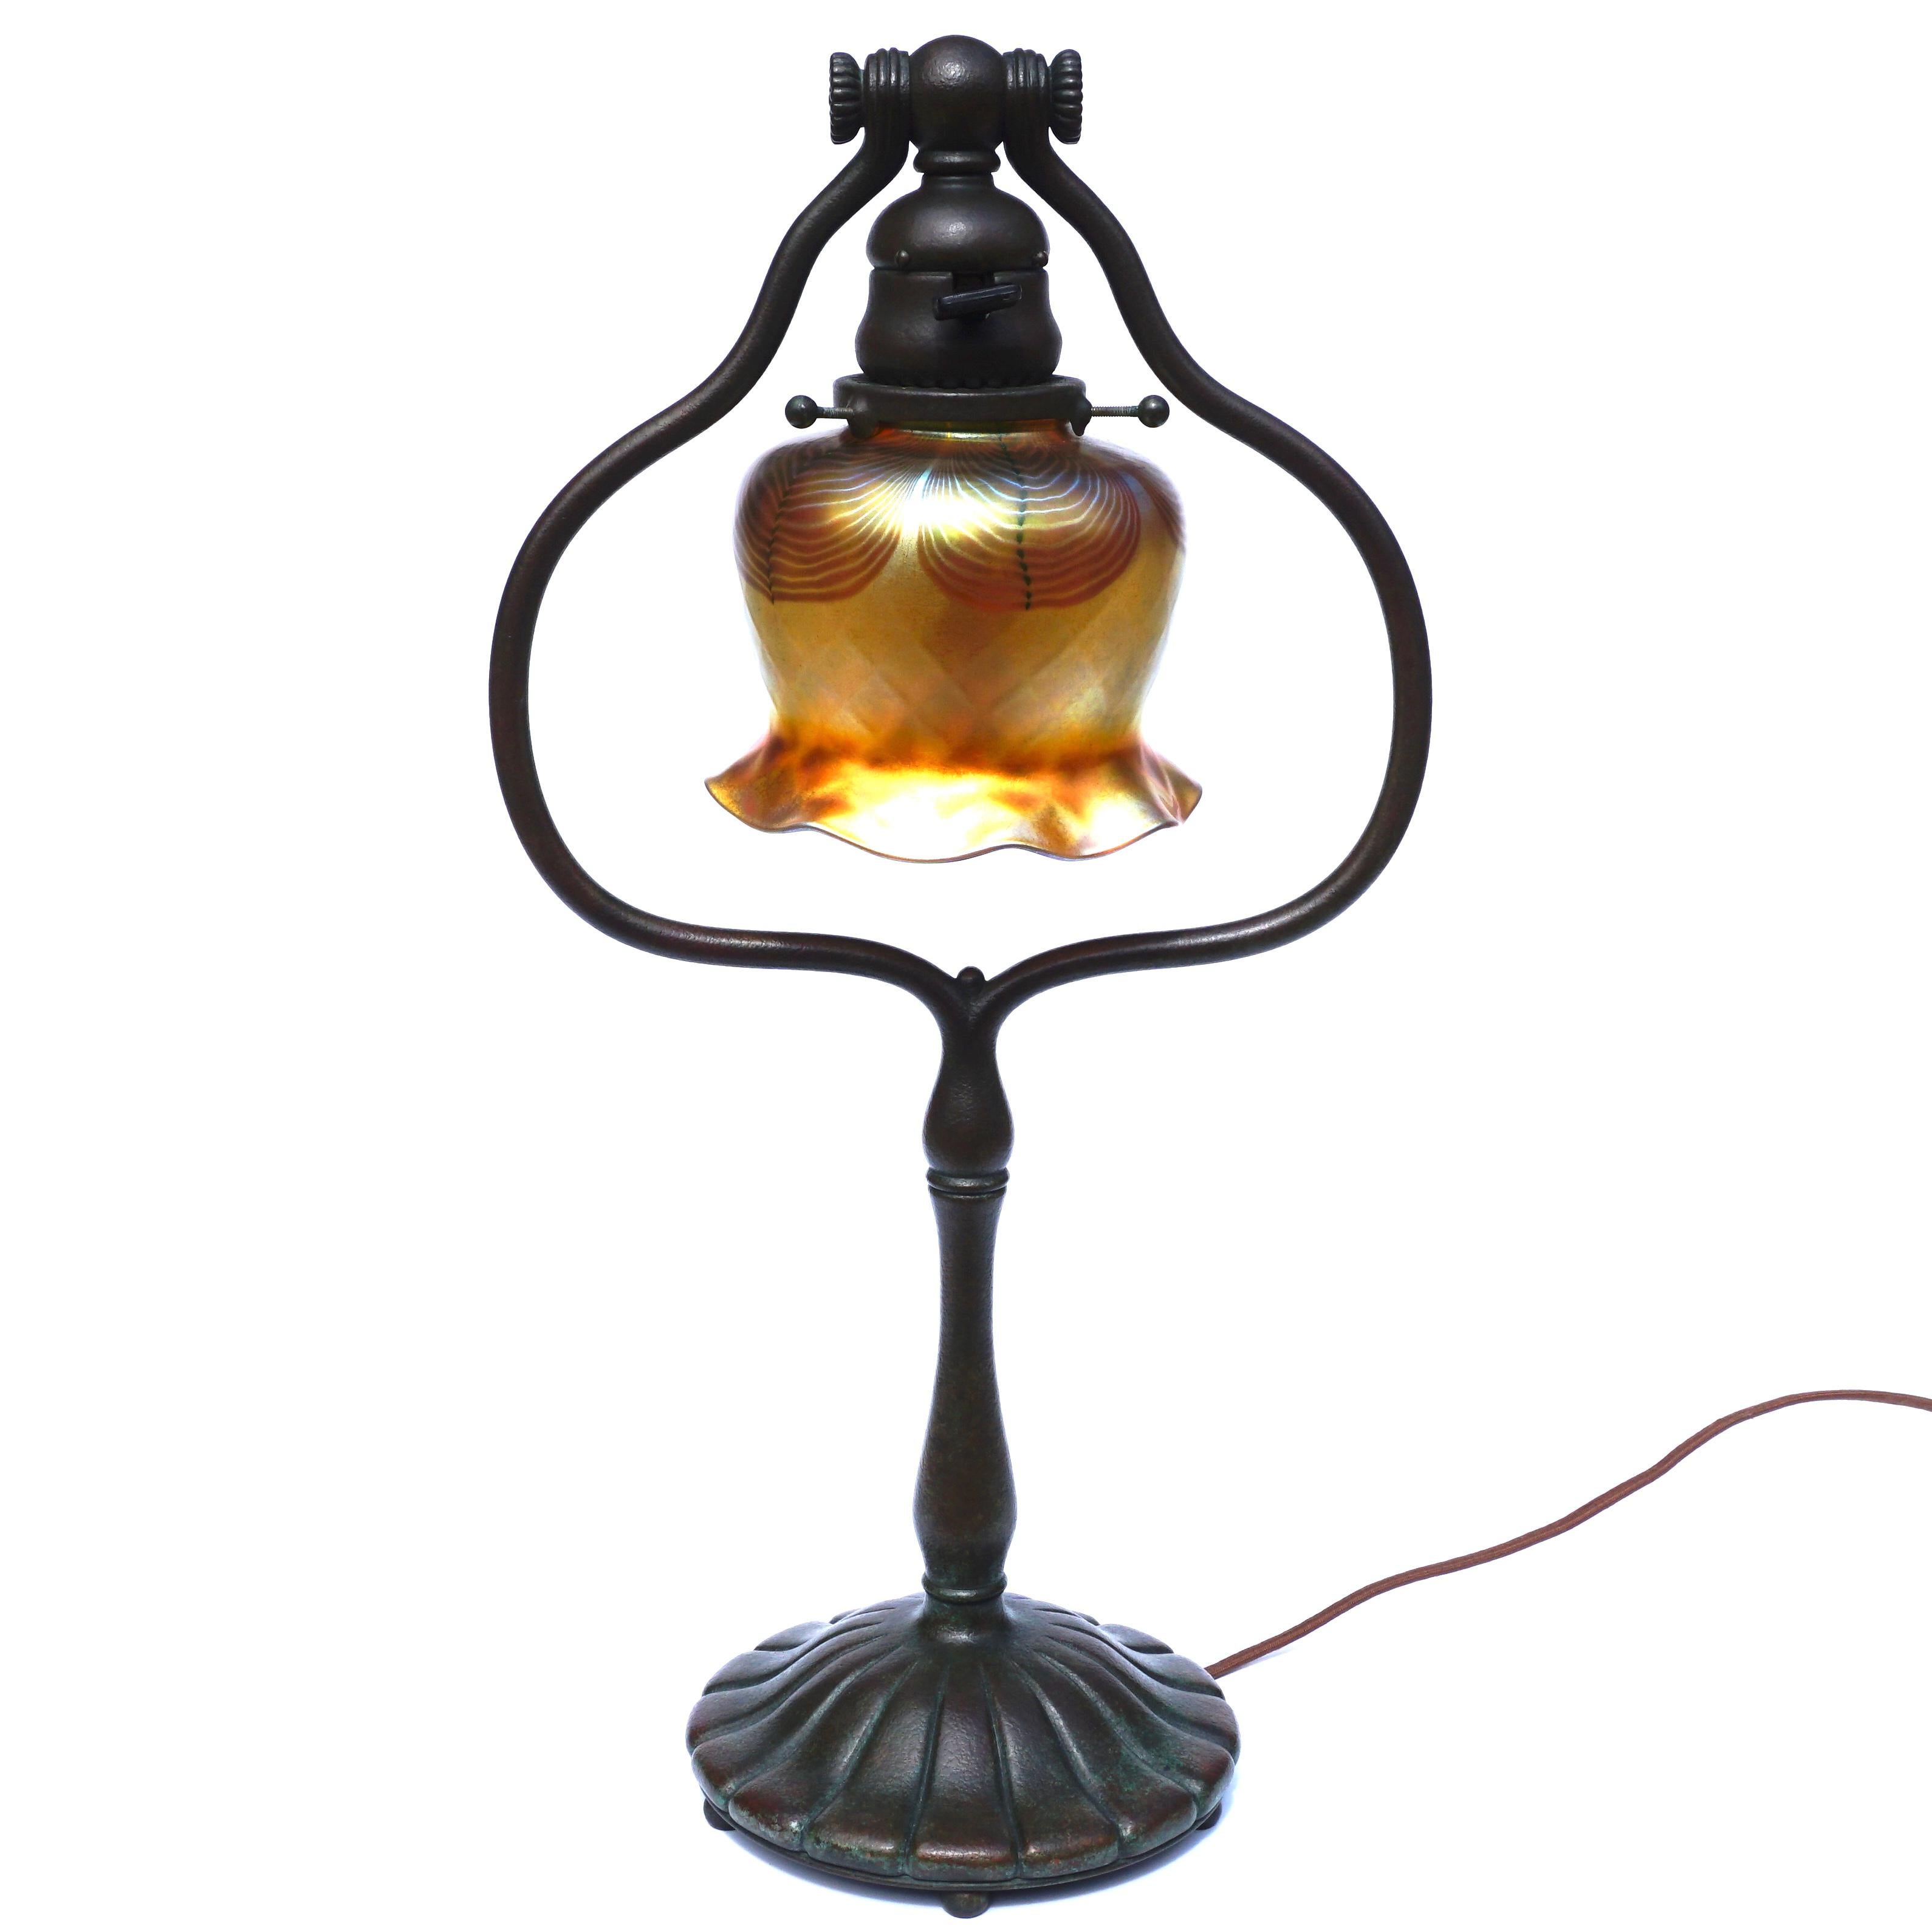 A wonderful patinated bronze and L.C.T. quilted and feather pulled favrile lamp that fits anywhere. At 18 Inches tall; this lamp is medium sized and would accommodate anywhere from the bedroom to the living room and in the office. The rare decorated